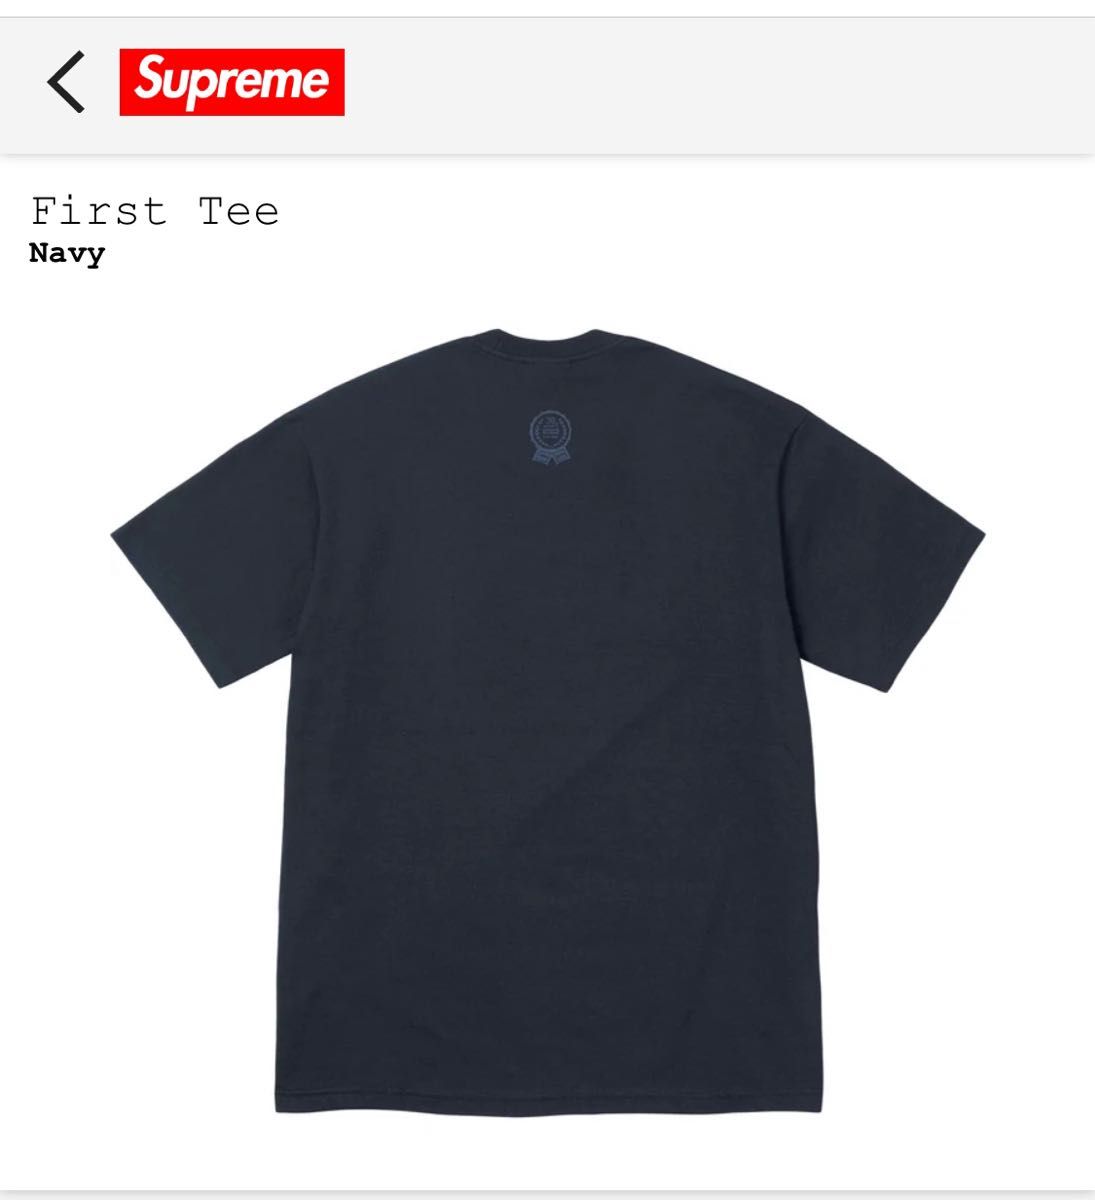 Supreme 30th Anniversary First Tee "Navy" 